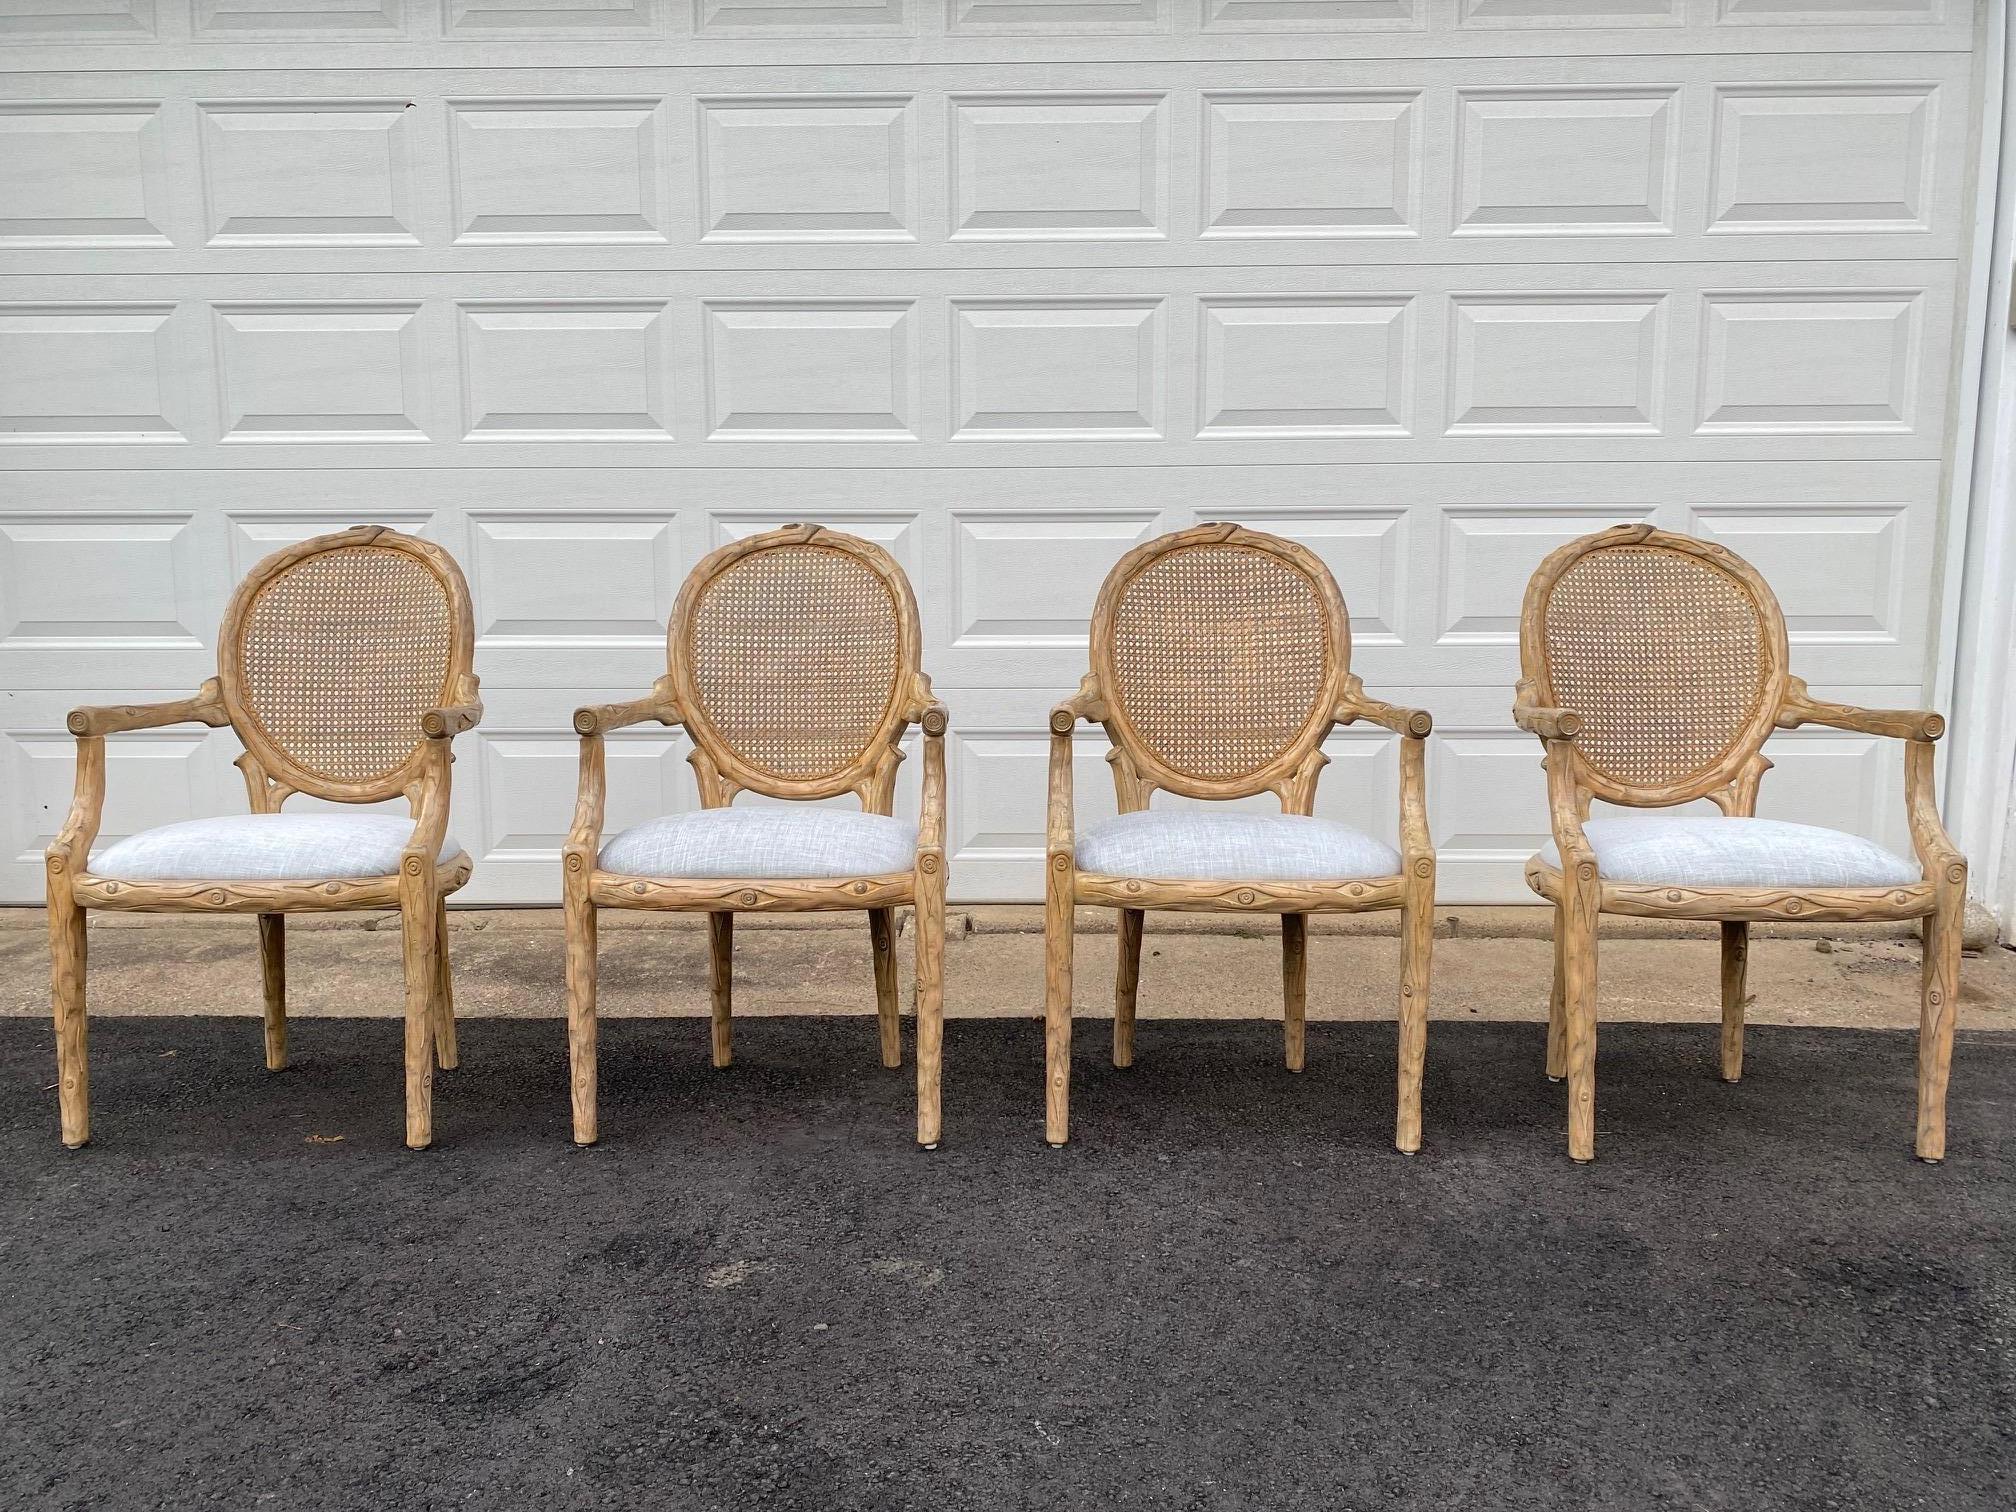  Stunning set of 4 natural light colored wood faux bois style dining arm chairs updated with new lush silver platinum chenille type neutral fabric. The caning is in excellent condition. Made by Peter Rocchia, The Wicker Works.

Arm Height: 27